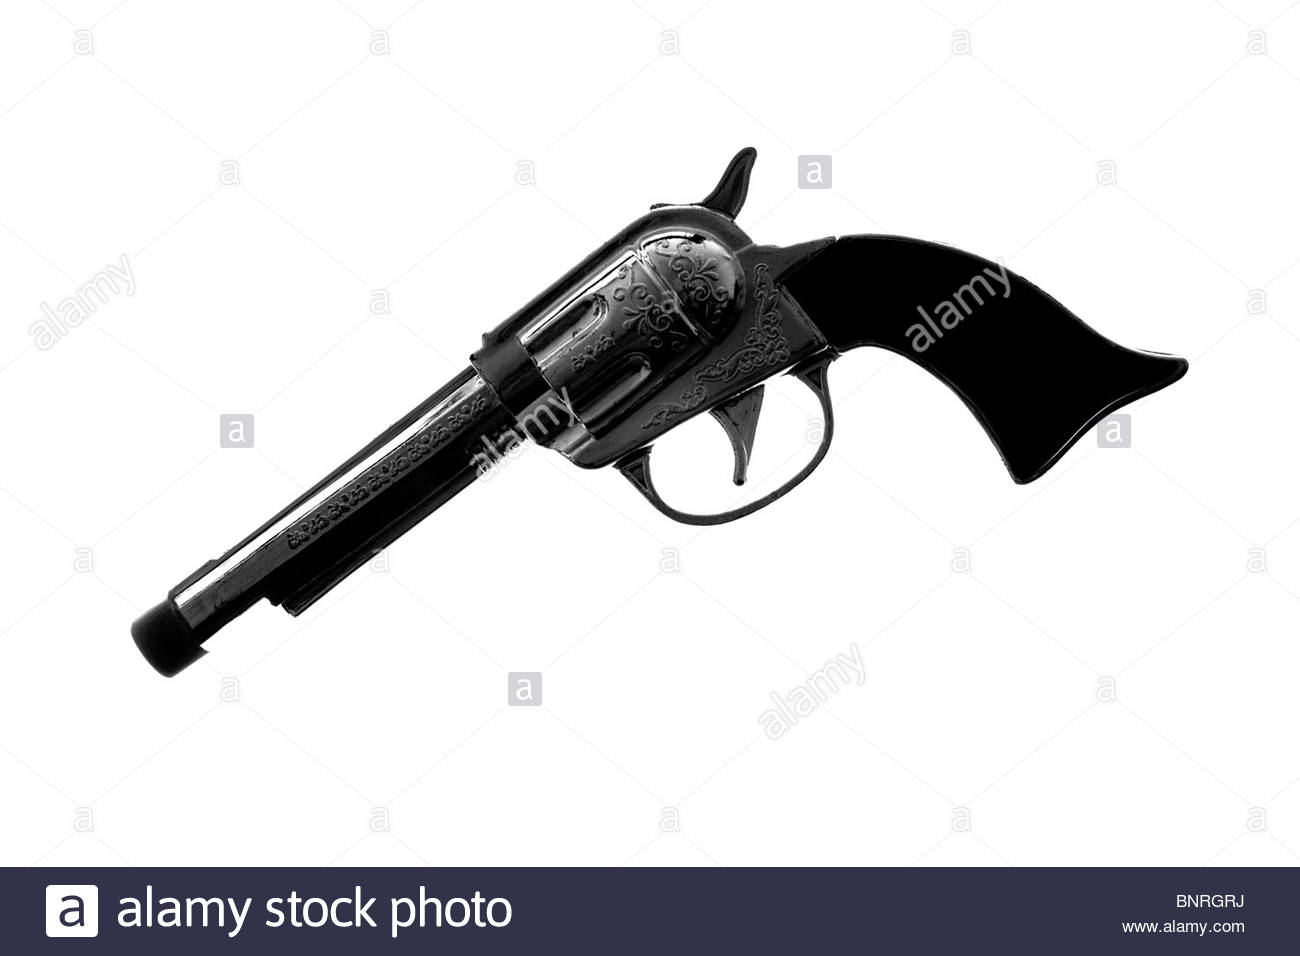 Silhouetted Toy Gun Stock Photo